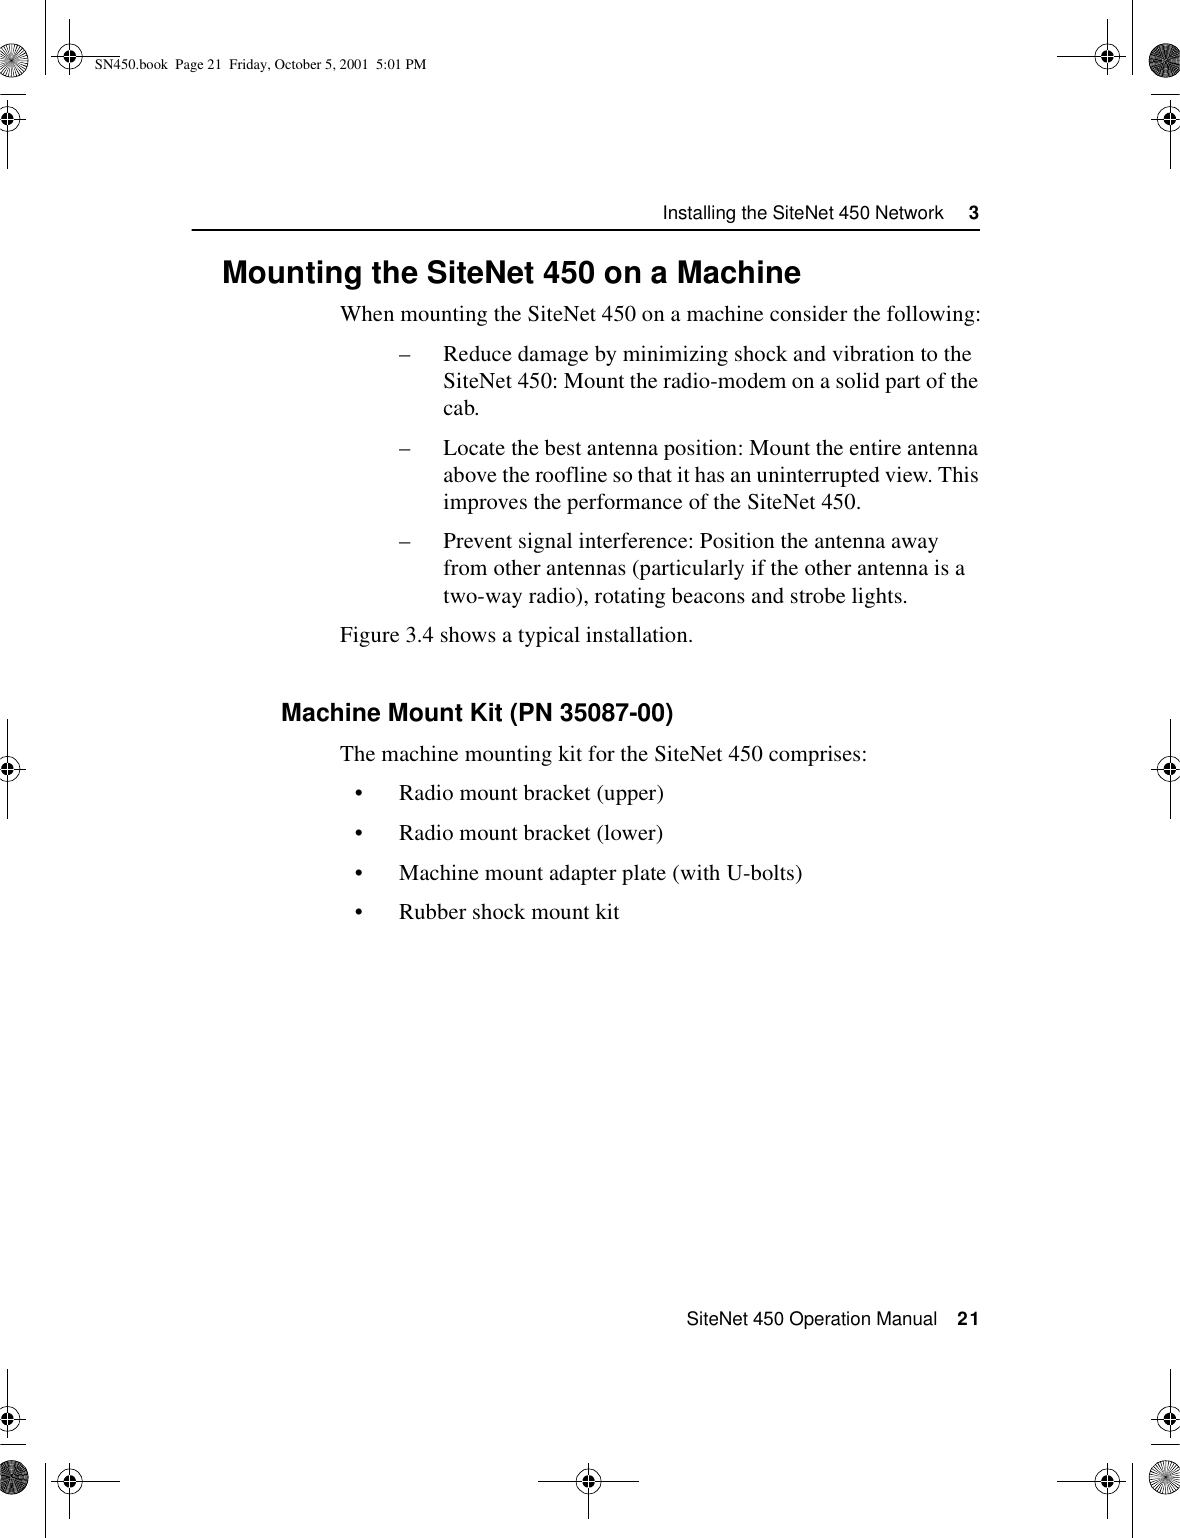  SiteNet 450 Operation Manual    21Installing the SiteNet 450 Network     33.3Mounting the SiteNet 450 on a MachineWhen mounting the SiteNet 450 on a machine consider the following:–Reduce damage by minimizing shock and vibration to the SiteNet 450: Mount the radio-modem on a solid part of the cab.–Locate the best antenna position: Mount the entire antenna above the roofline so that it has an uninterrupted view. This improves the performance of the SiteNet 450.–Prevent signal interference: Position the antenna away from other antennas (particularly if the other antenna is a two-way radio), rotating beacons and strobe lights.Figure 3.4 shows a typical installation.3.3.1Machine Mount Kit (PN 35087-00)The machine mounting kit for the SiteNet 450 comprises:•Radio mount bracket (upper)•Radio mount bracket (lower)•Machine mount adapter plate (with U-bolts)•Rubber shock mount kitSN450.book  Page 21  Friday, October 5, 2001  5:01 PM